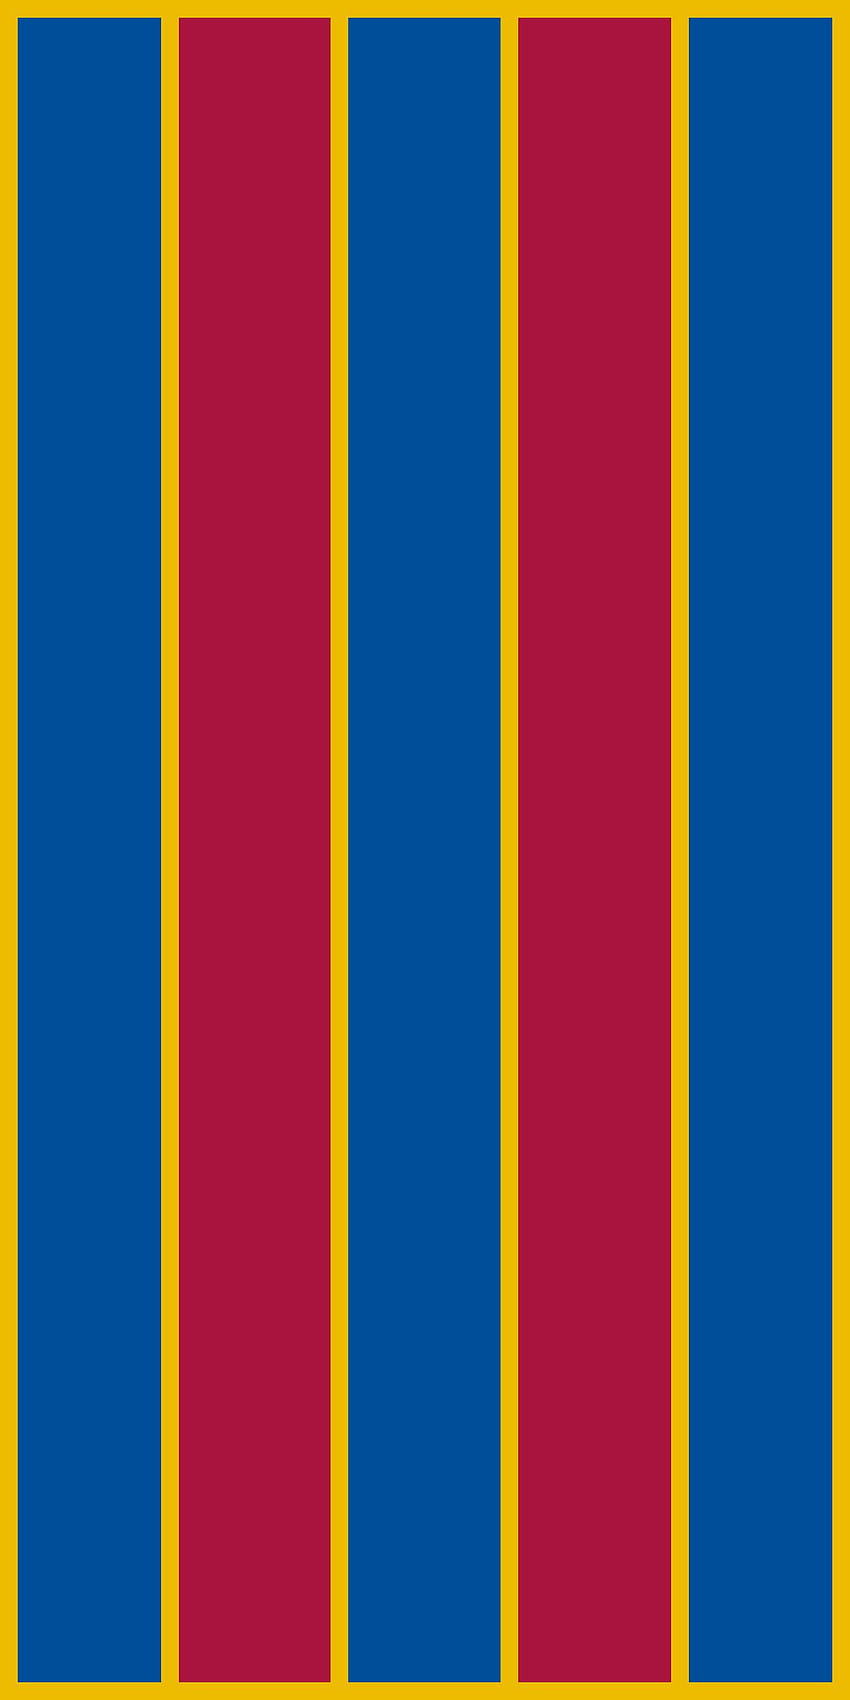 Made a few for phones because I couldn't find one that I liked., barcelona 2021 HD phone wallpaper